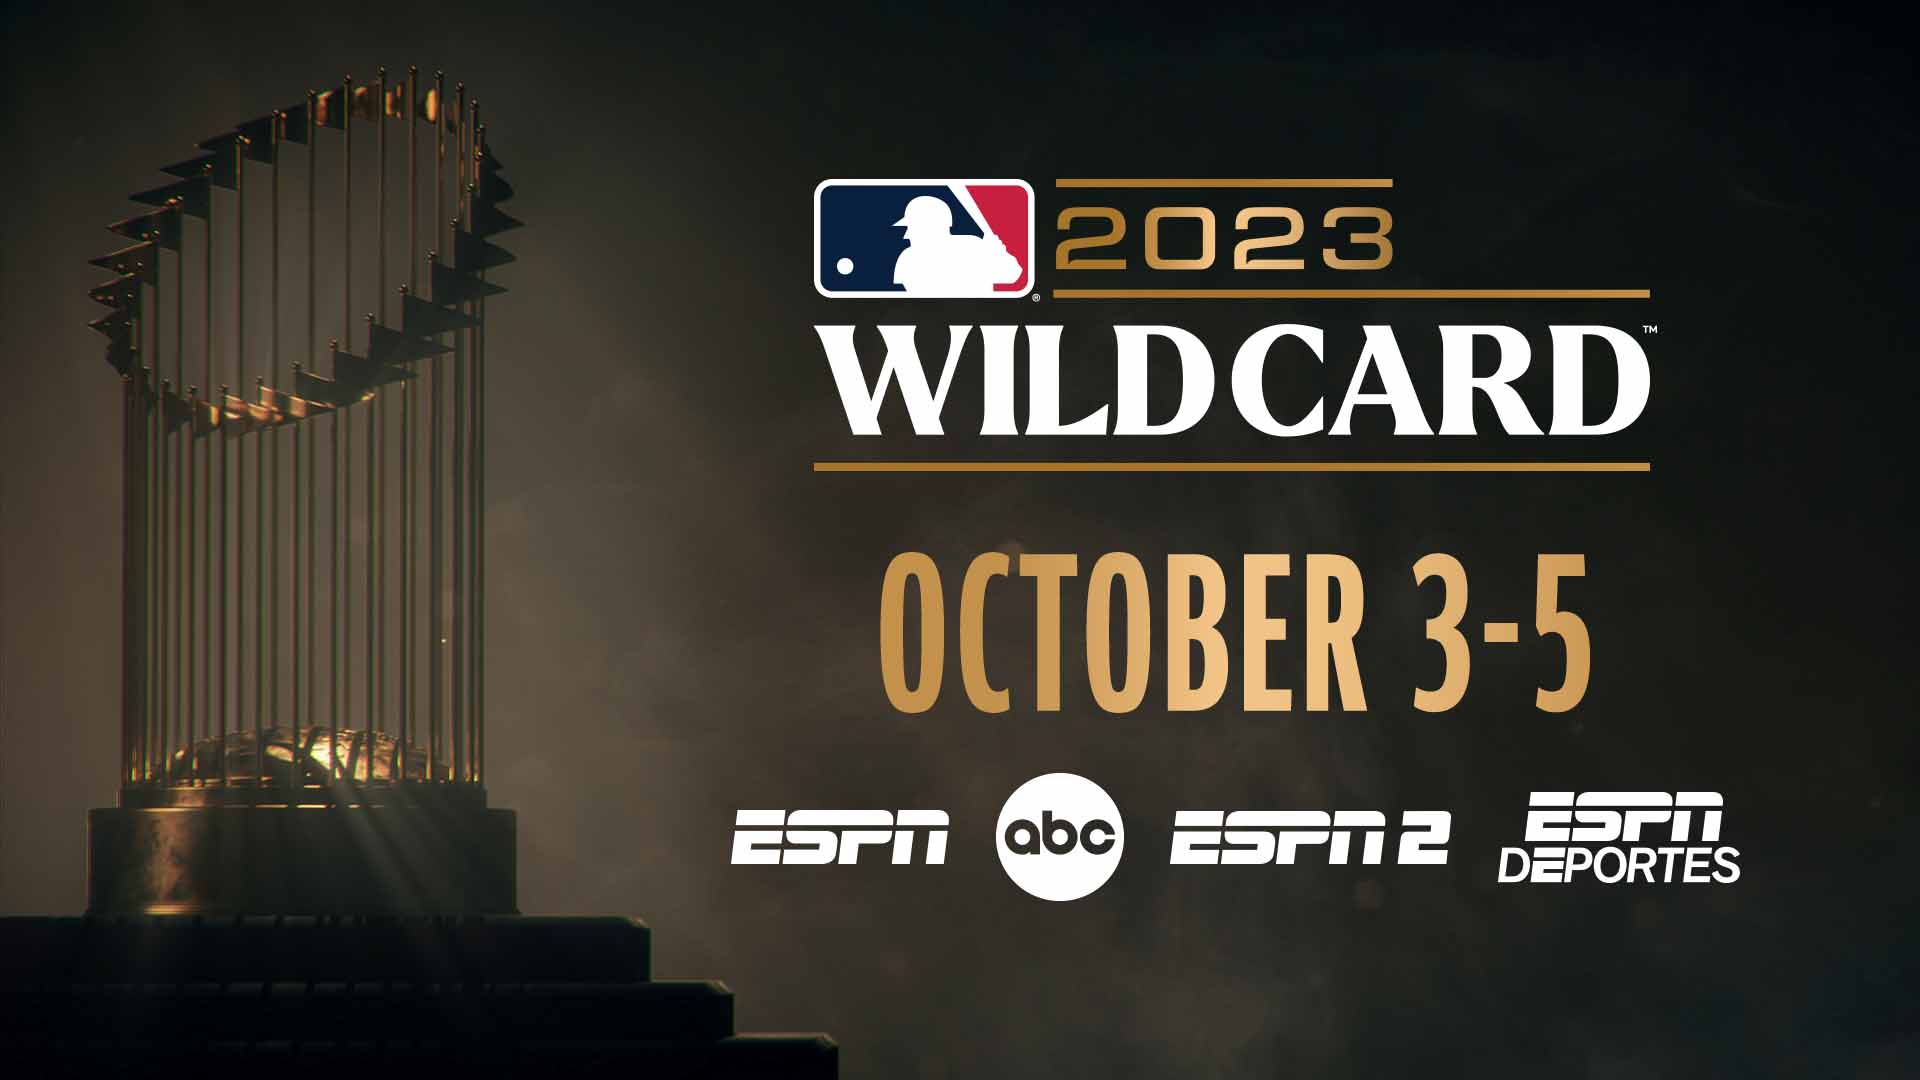 MLB Postseason on DISH: Matchups, Schedule and More - THE DIG